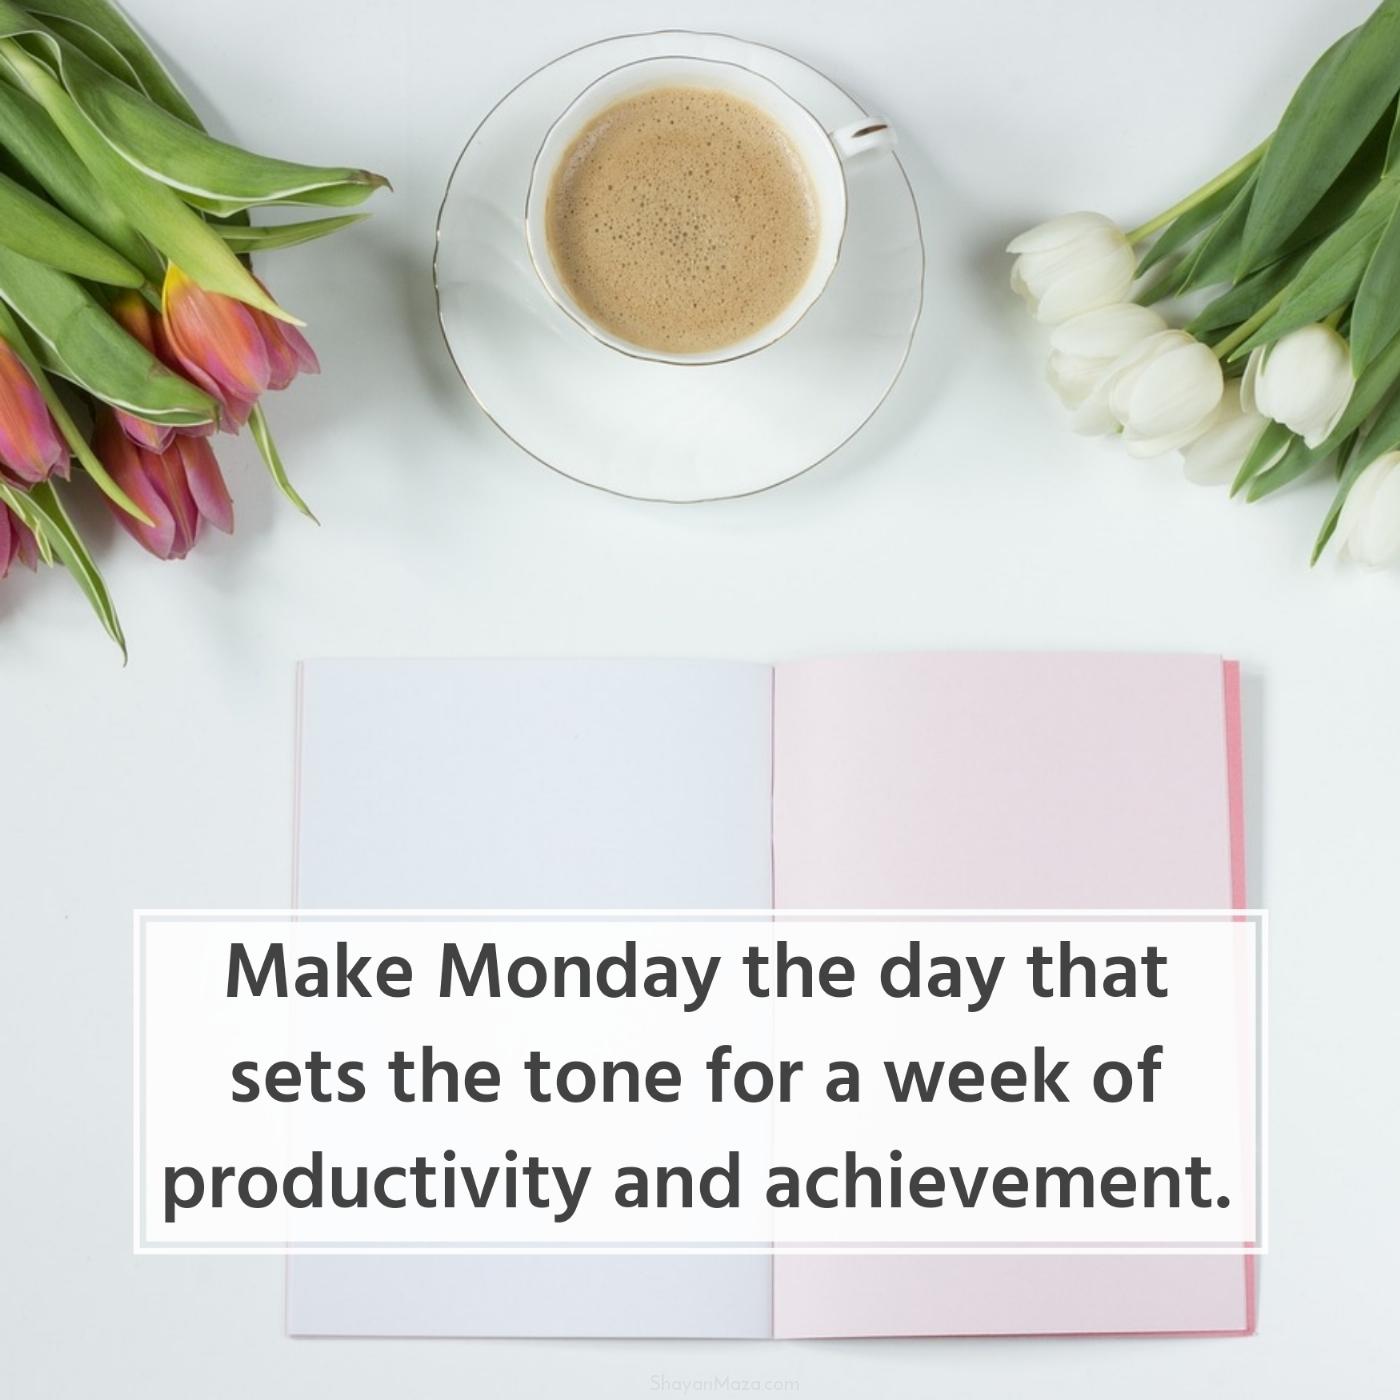 Make Monday the day that sets the tone for a week